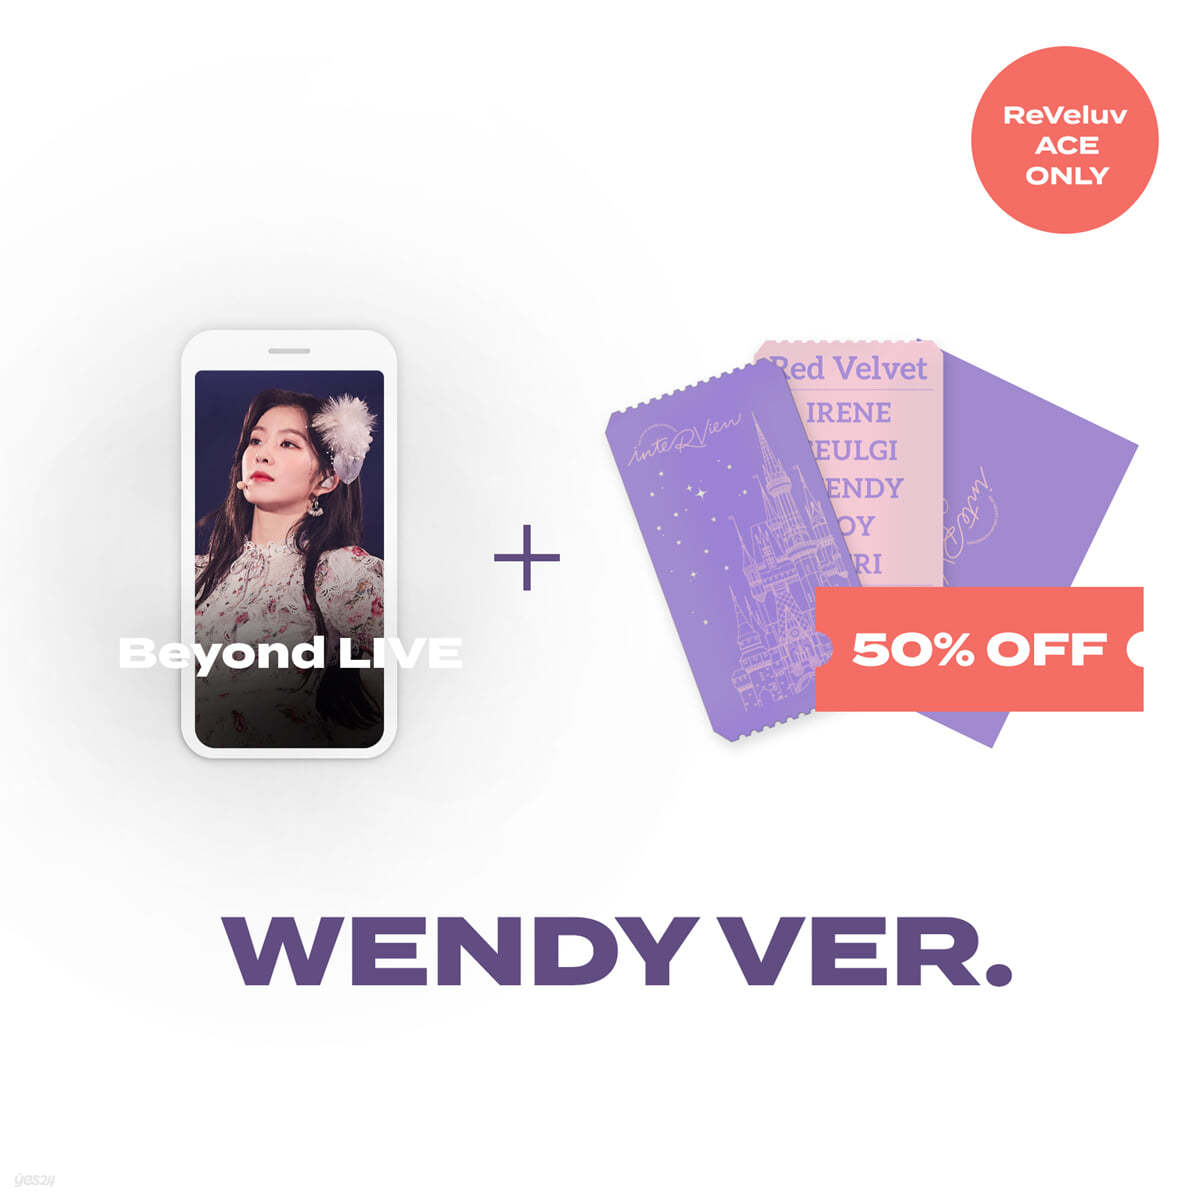 [ReVeluv ACE ONLY] [WENDY] Beyond LIVE 관람권 + SPECIAL AR TICKET SET Beyond LIVE - Red Velvet Online Fanmeeting - inteRView vol.7 : Queendom